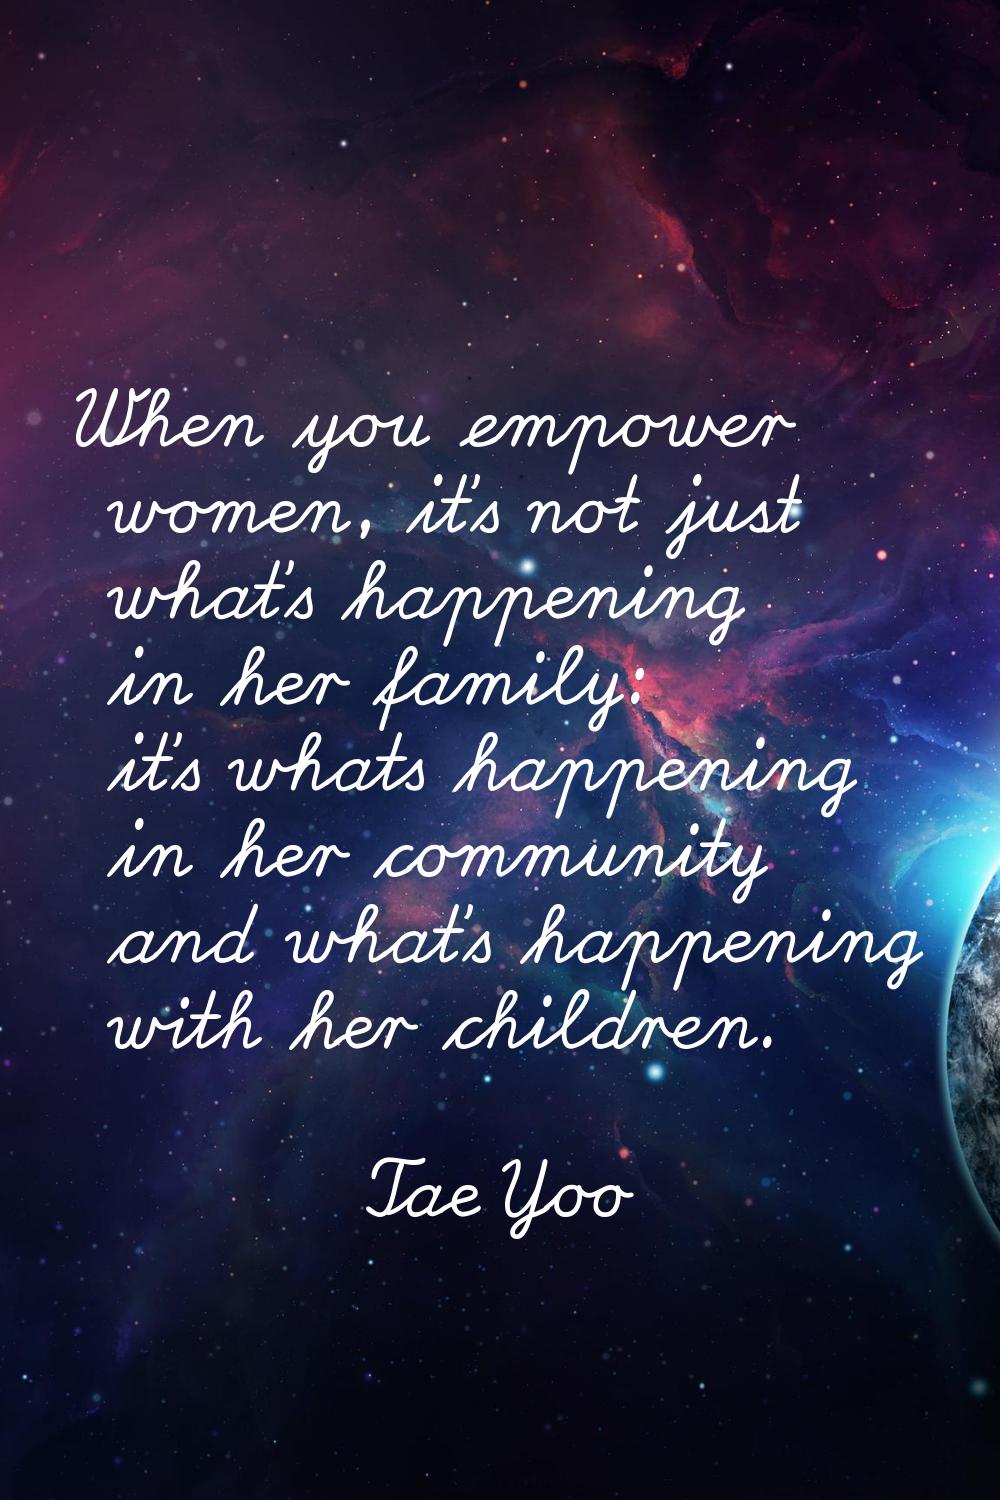 When you empower women, it's not just what's happening in her family: it's whats happening in her c